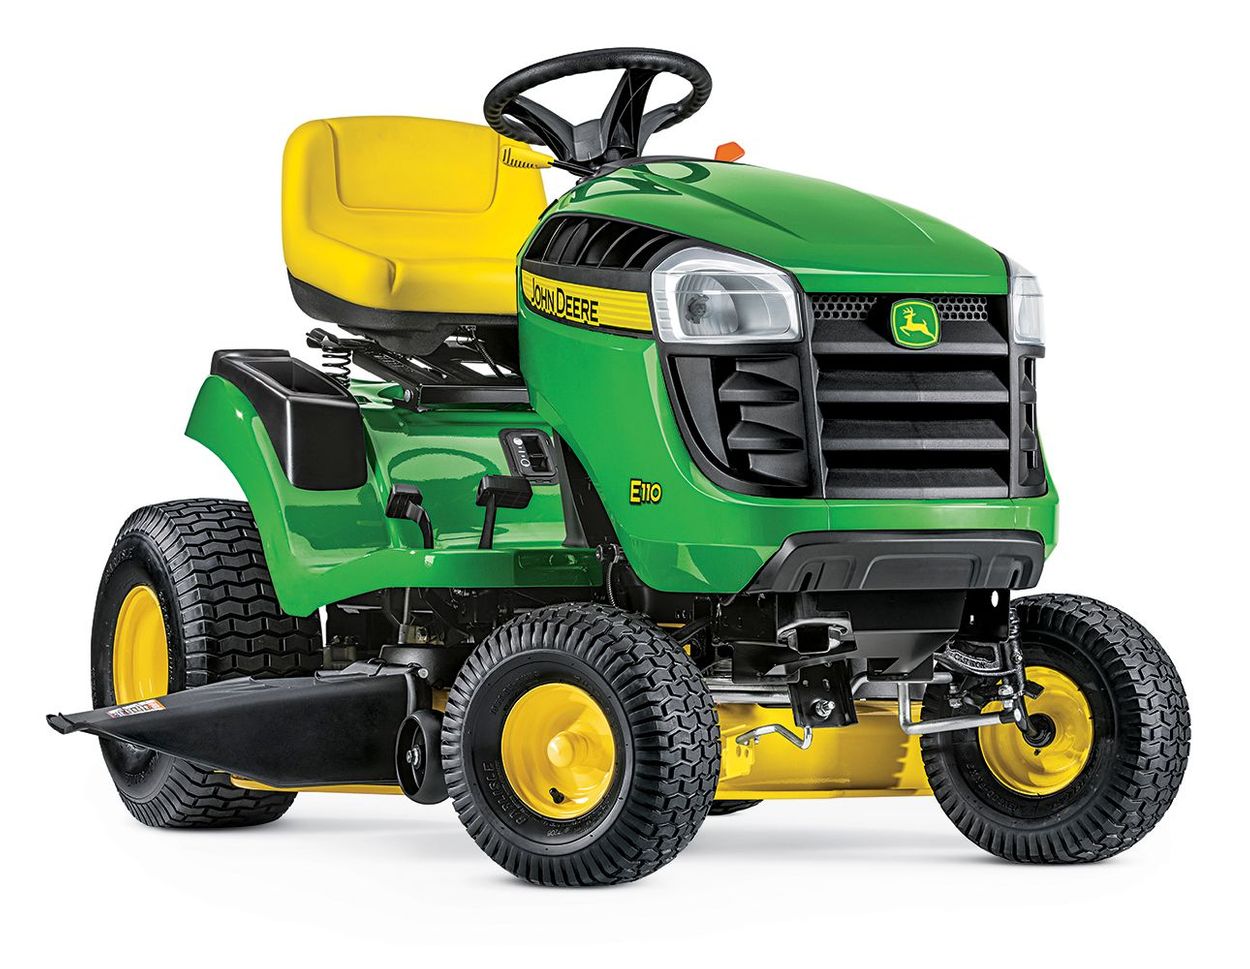 John Deere E110 19 Hp Side By Side Hydrostatic 42 In Riding Lawn Mower With Mulching Capability Kit Sold Separately In The Gas Riding Lawn Mowers Department At Lowes Com